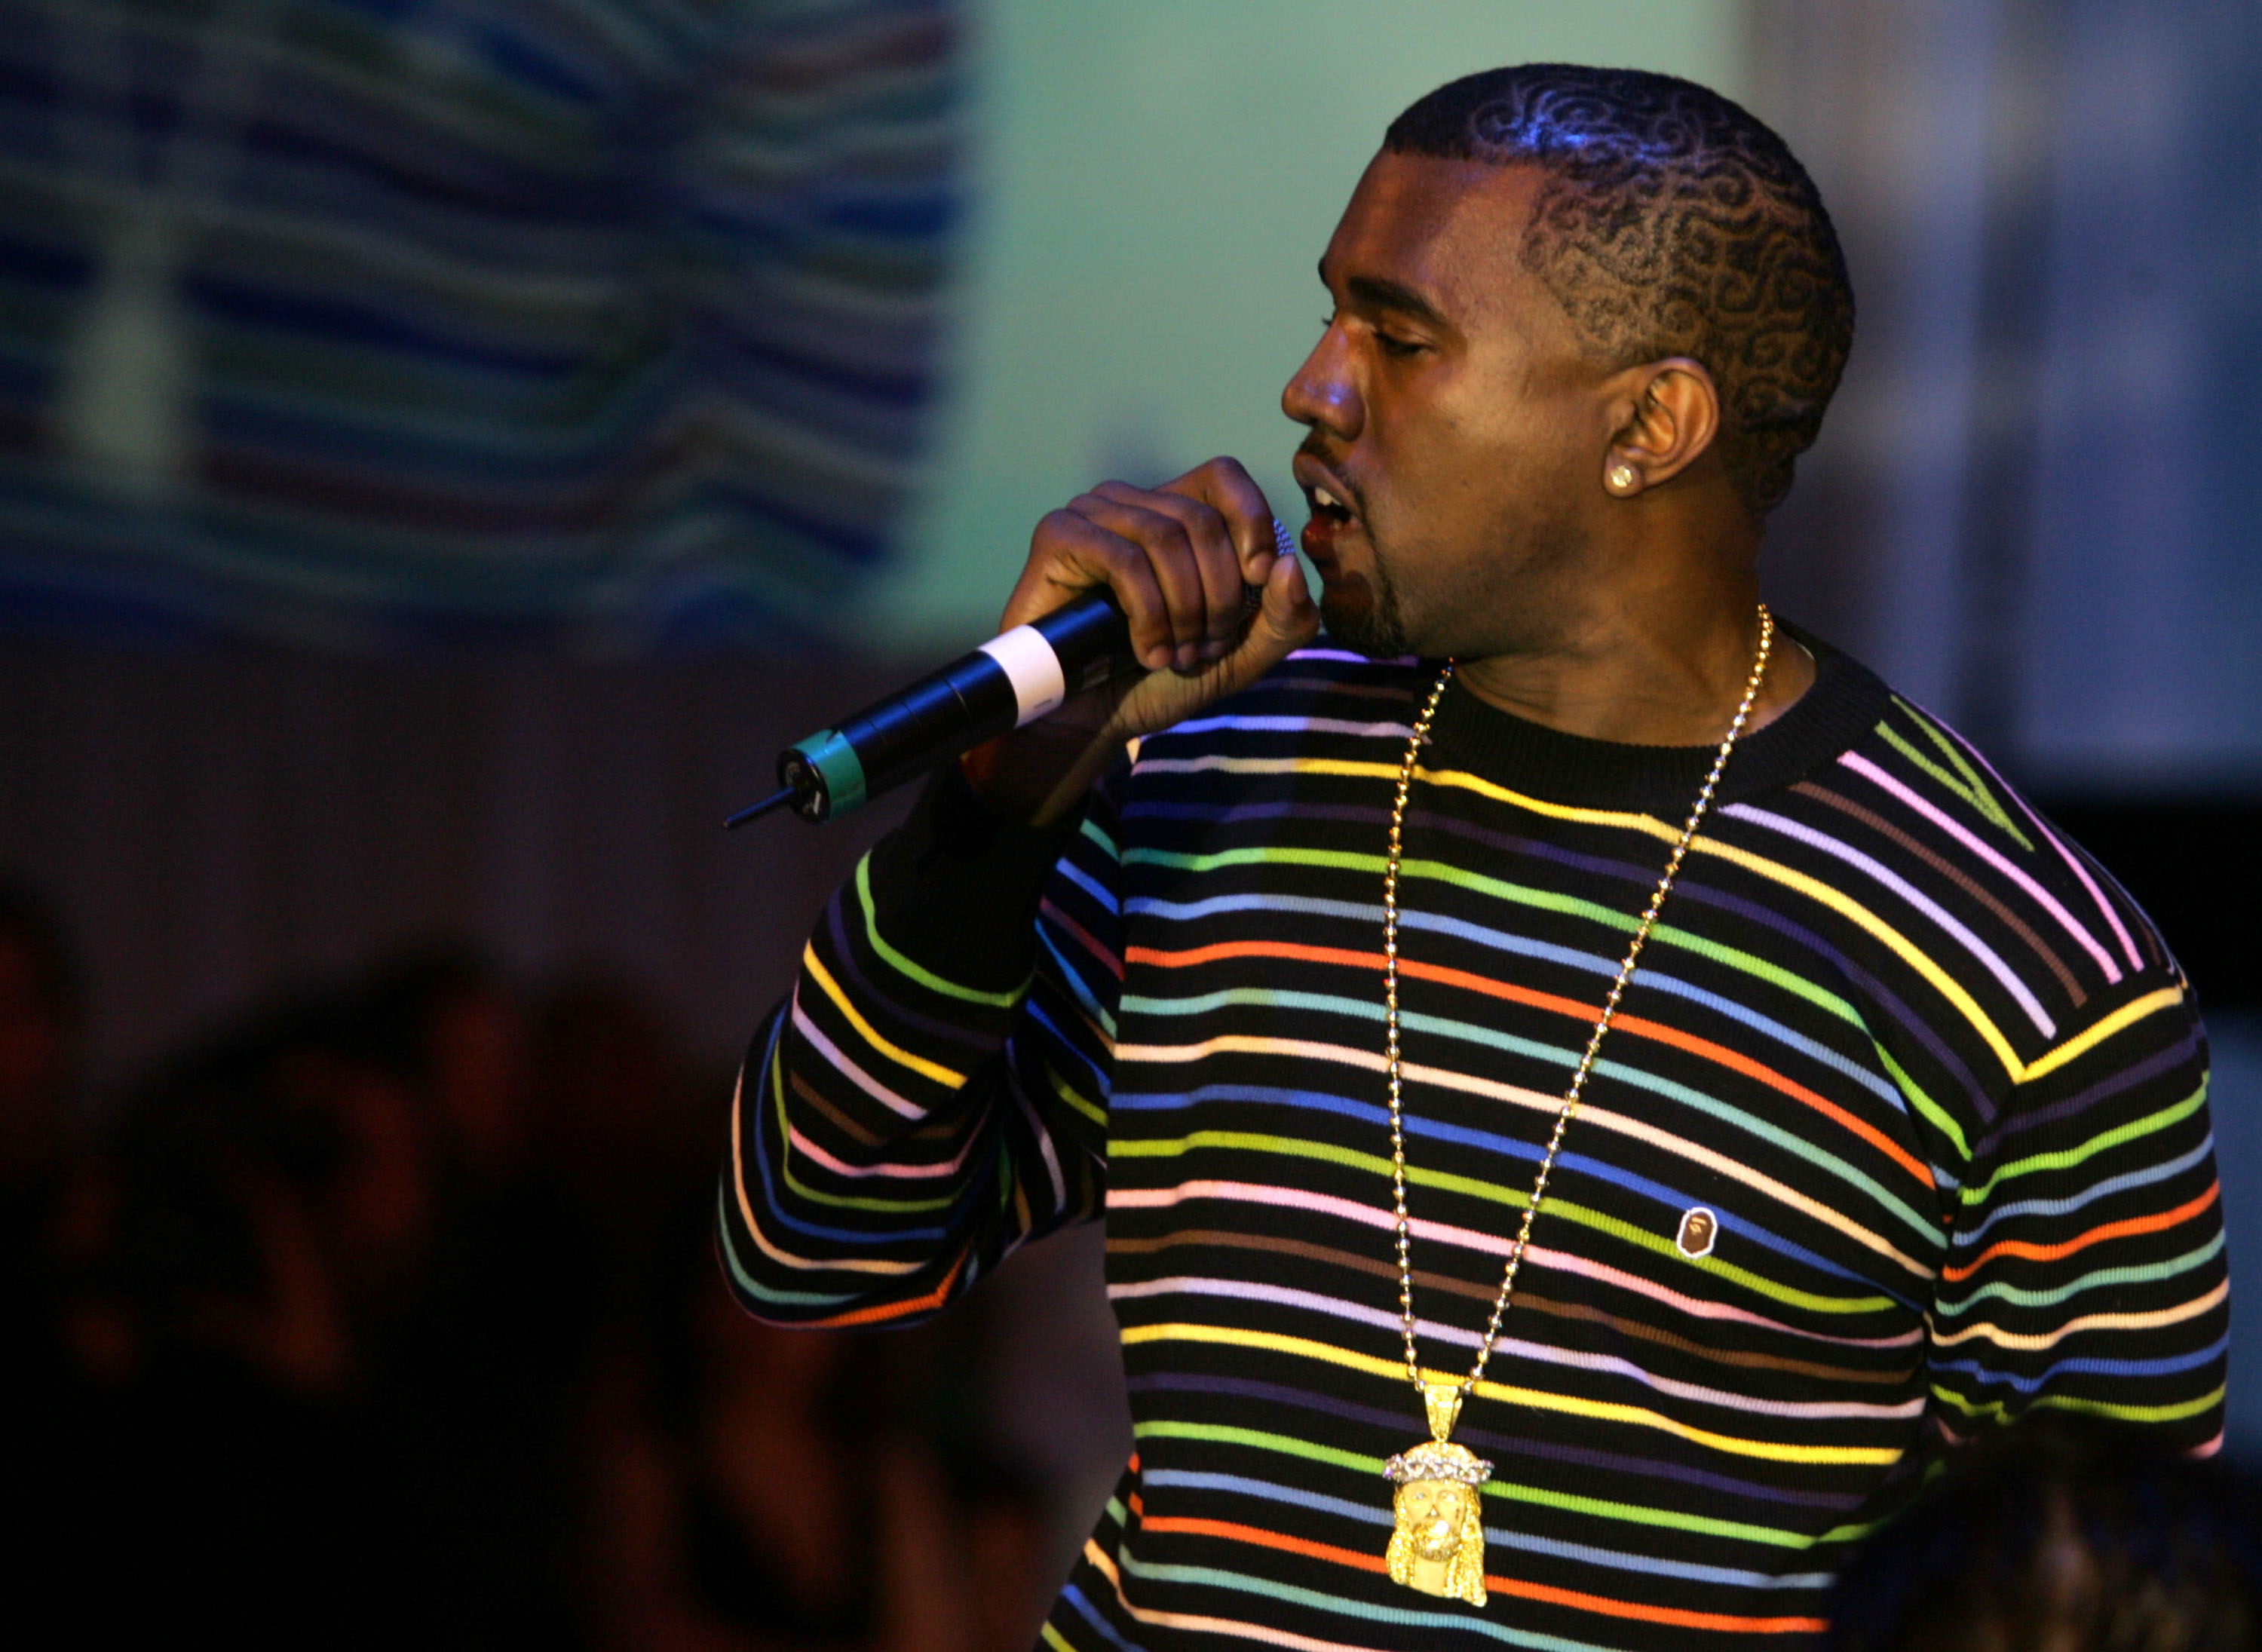 Singer Kanye West performs onstage at the 4th Annual &quot;Ten&quot; Fashion Show on February 22, 2005 in Hollywood, California